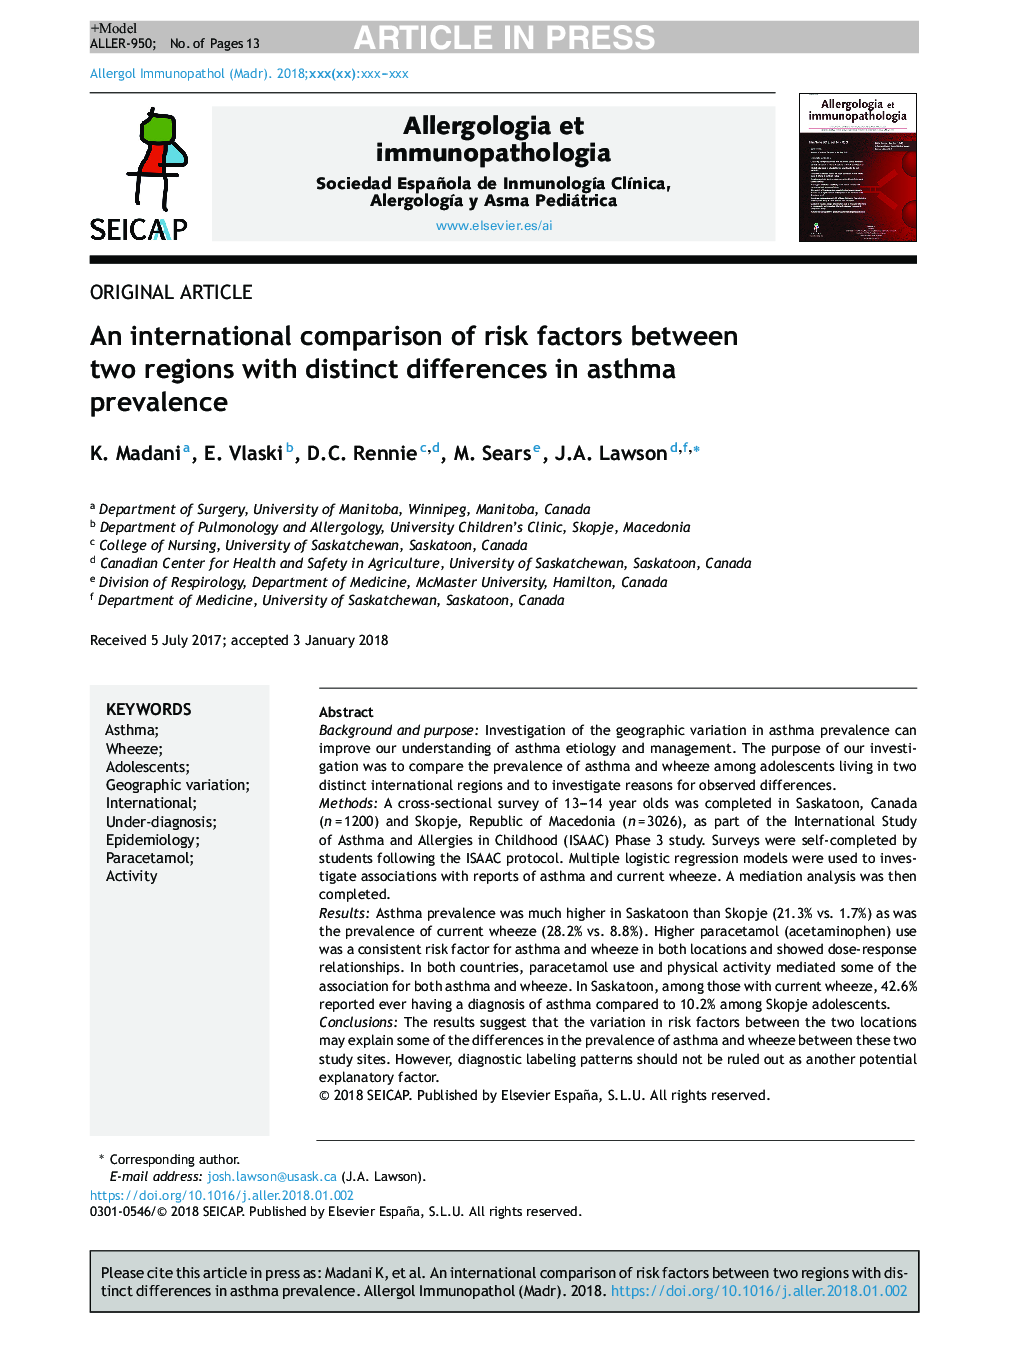 An international comparison of risk factors between two regions with distinct differences in asthma prevalence